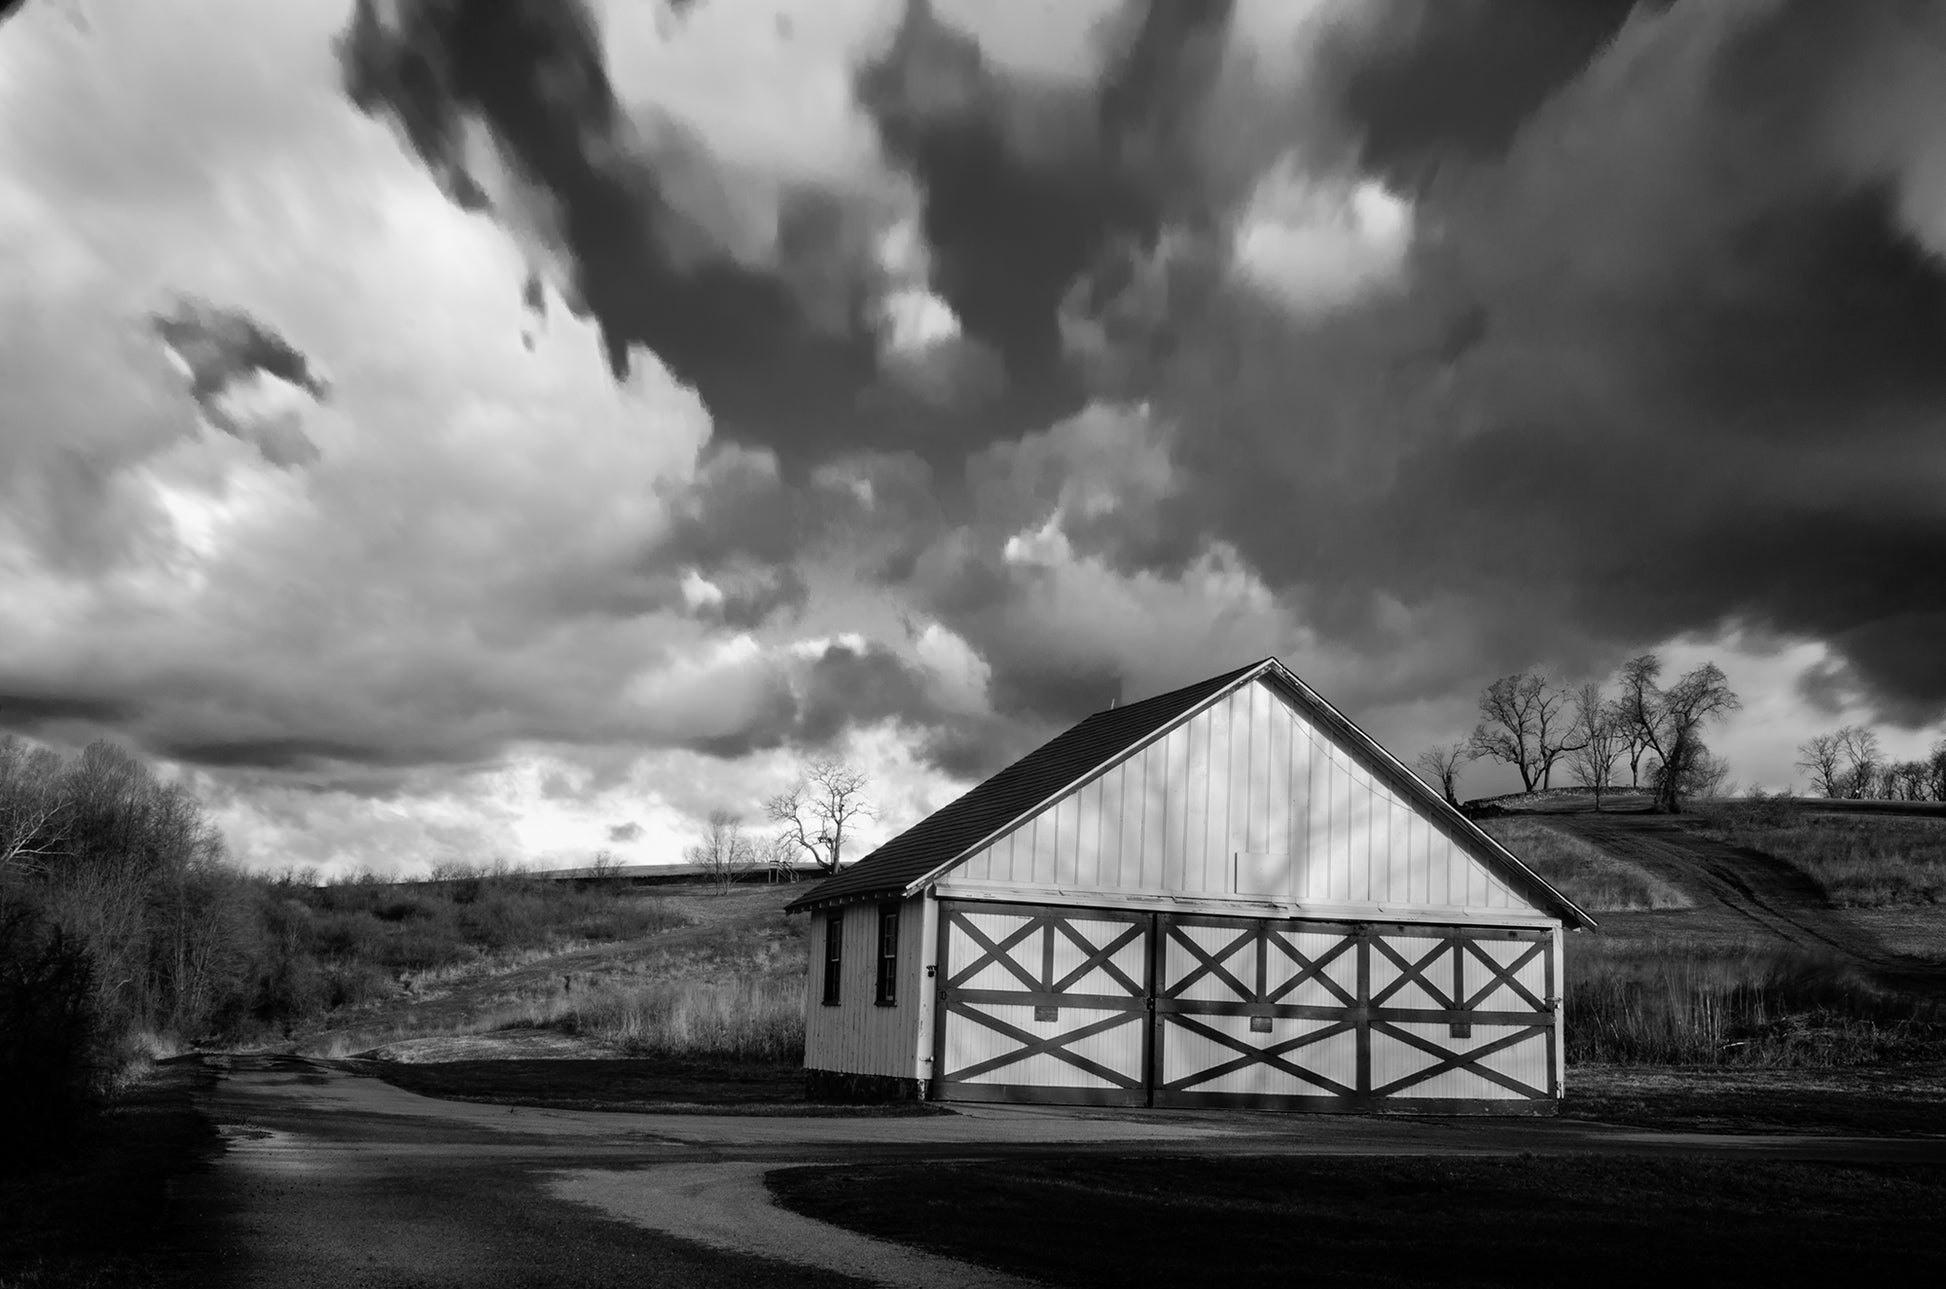 Art And Prints: Aging Barn in the Morning Sun Black and White - Rural / Country Style Landscape / Nature Photograph Loose / Unframed / Frameless / Frameable Wall Art Print - Artwork